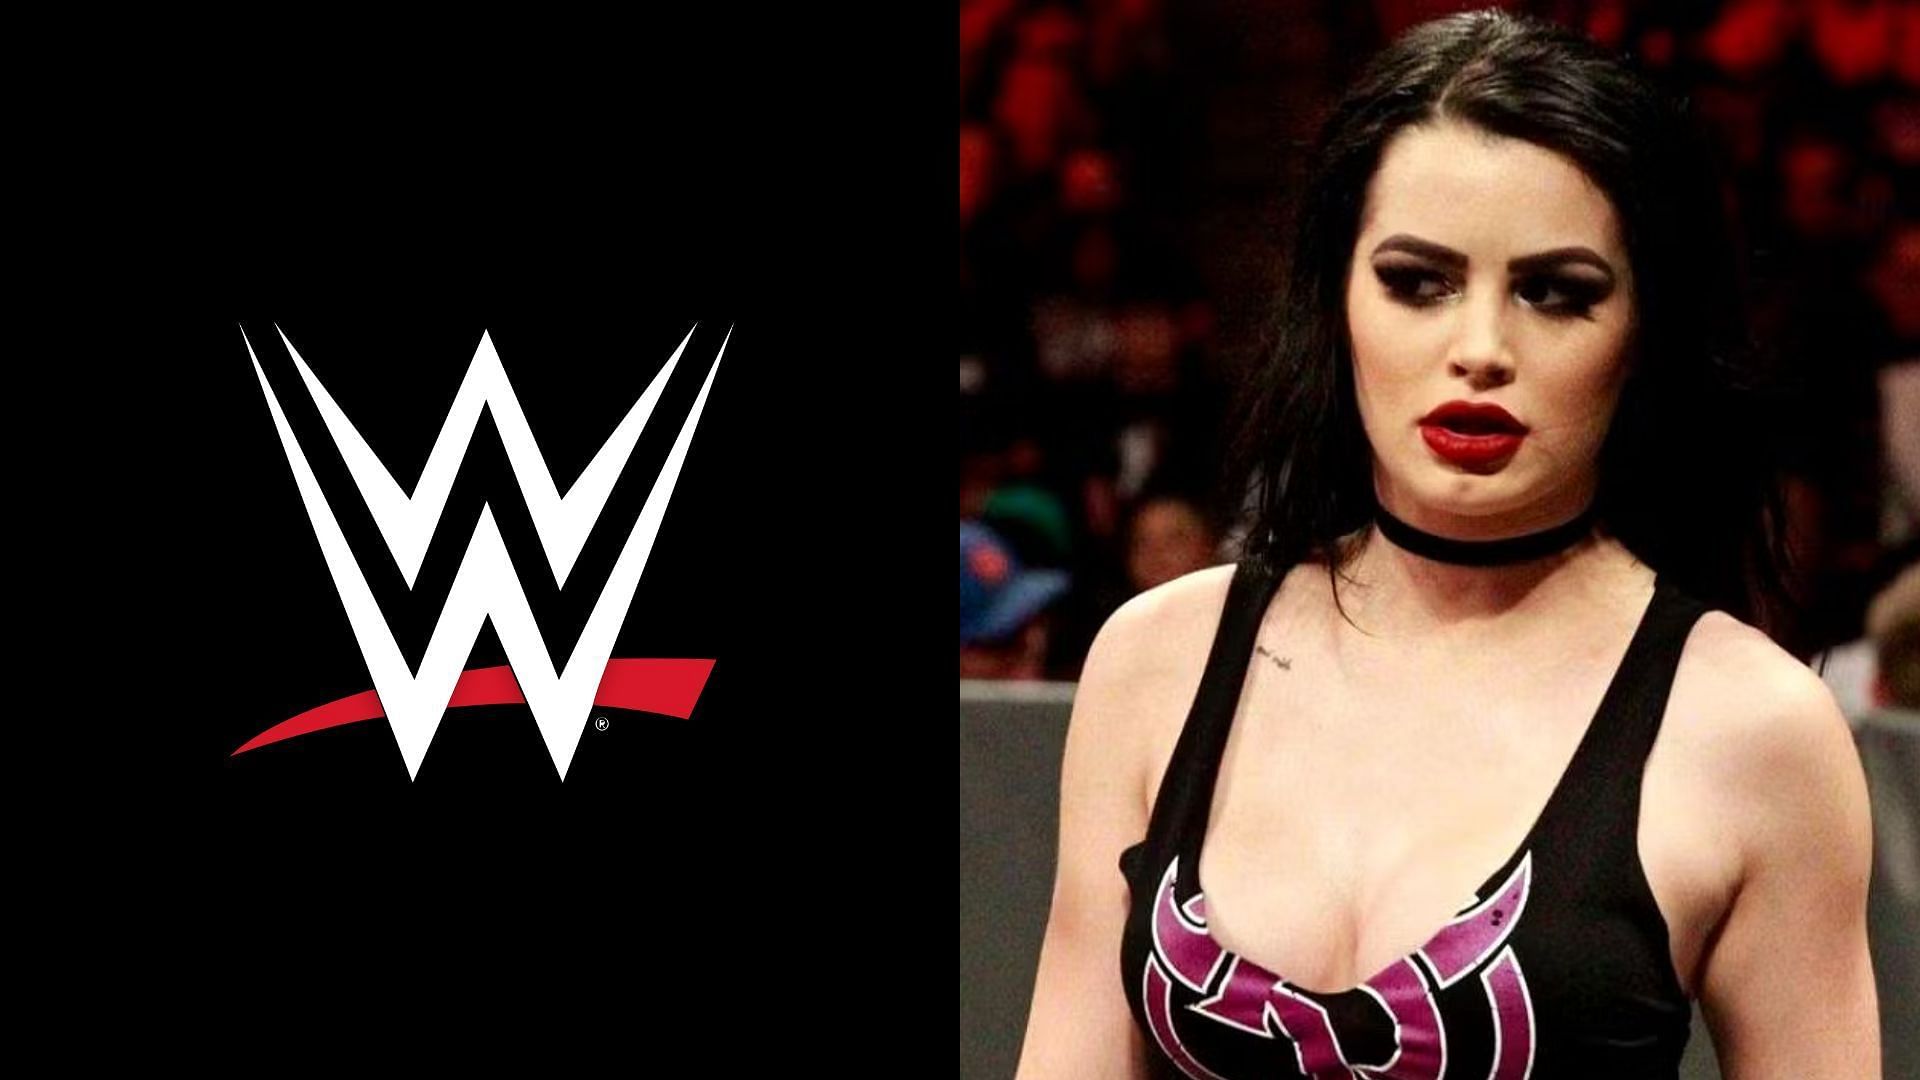 Saraya reacted to the release of a WWE Superstar